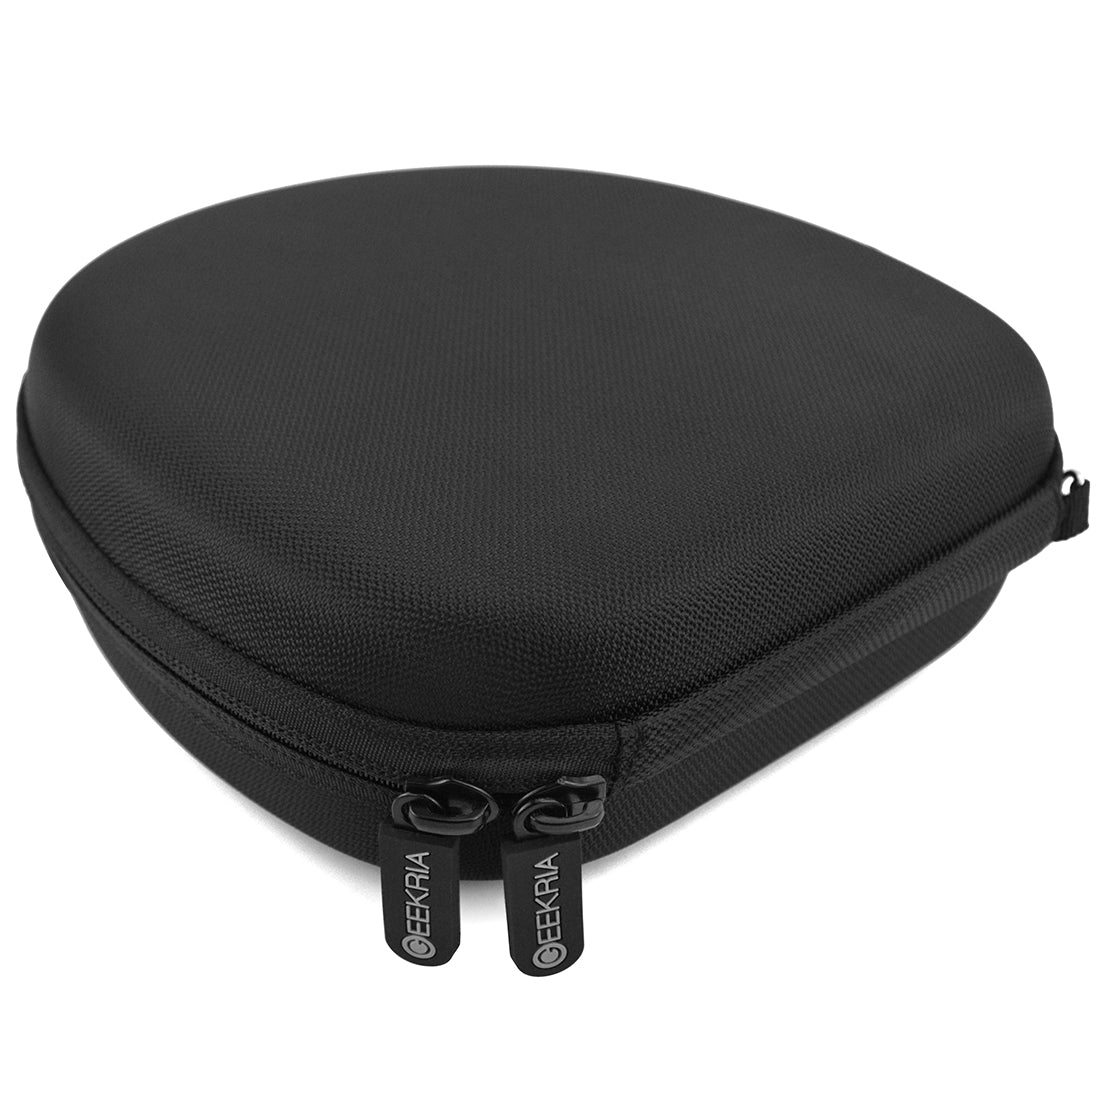 Geekria Hard Shell Carrying Case for various Headphones (BLACK)